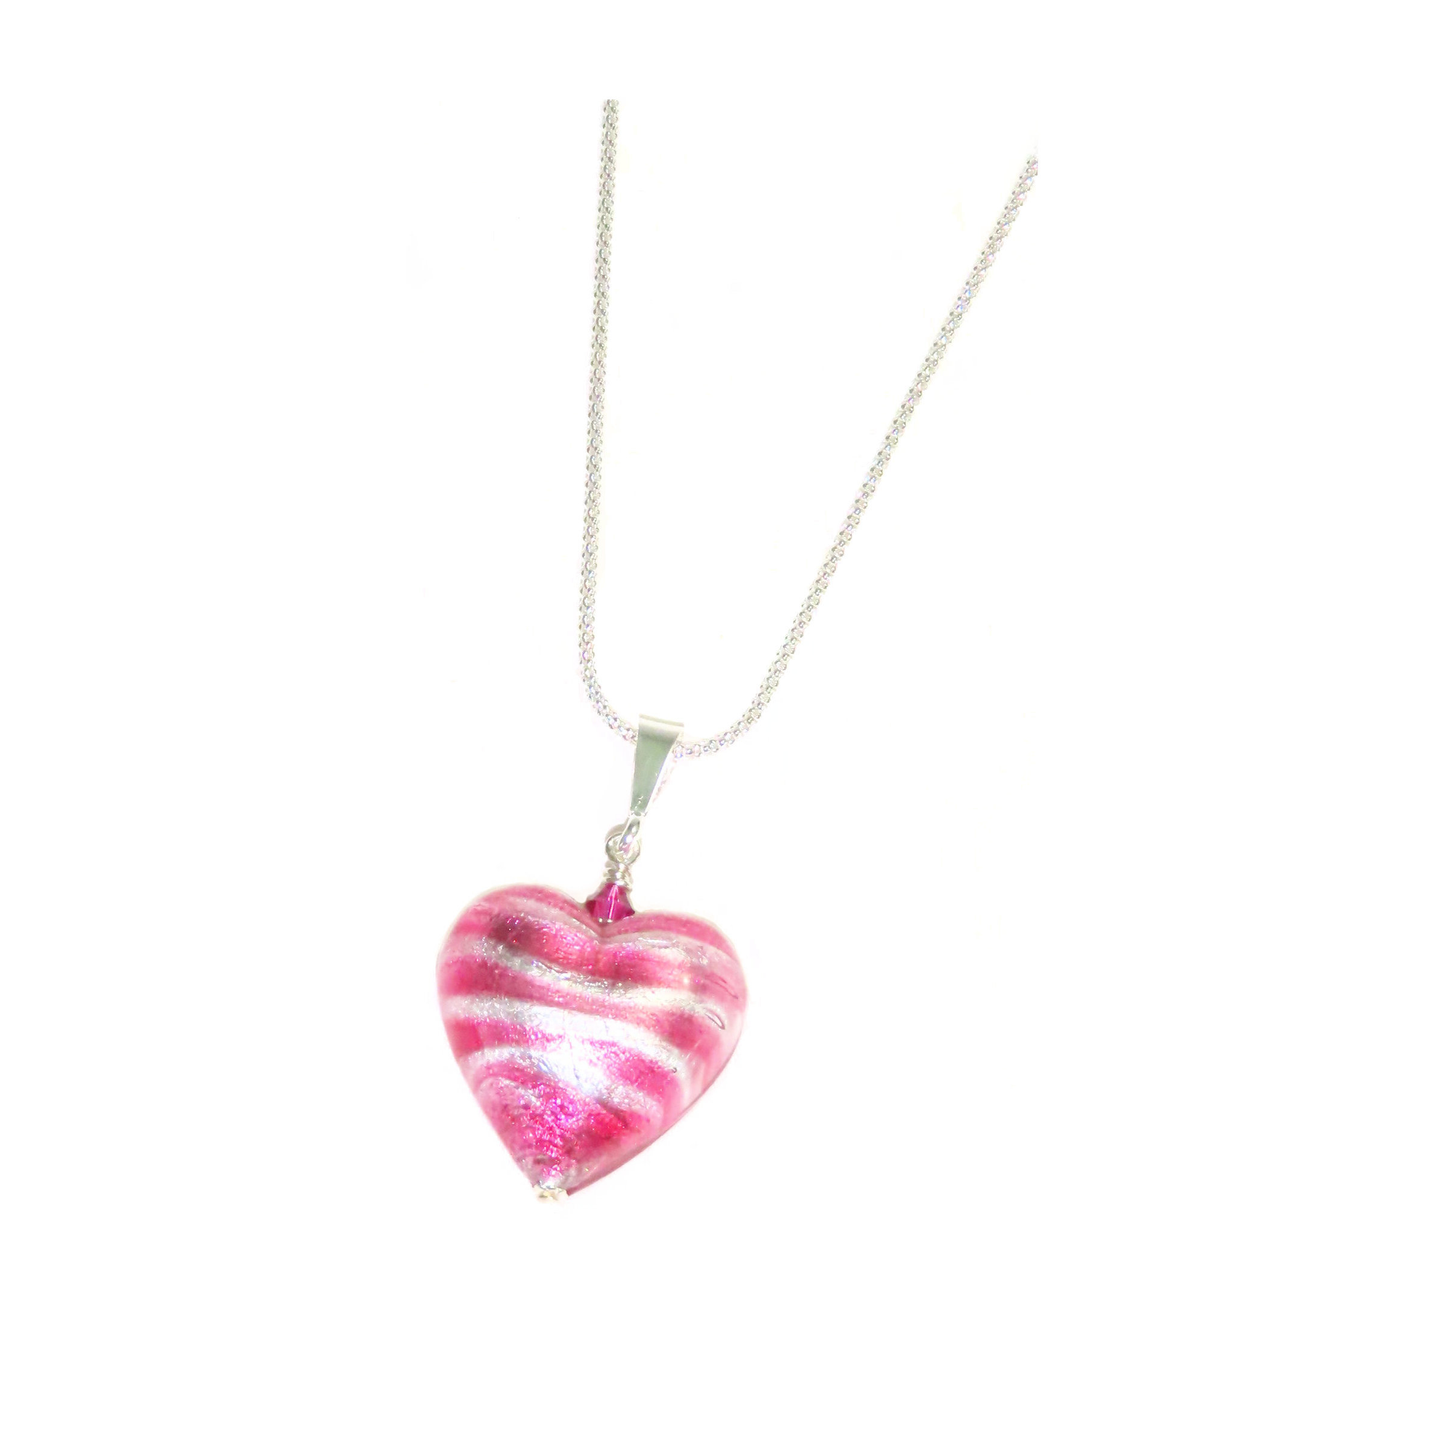 Murano glass pink striped heart pendant necklace with sterling silver chain